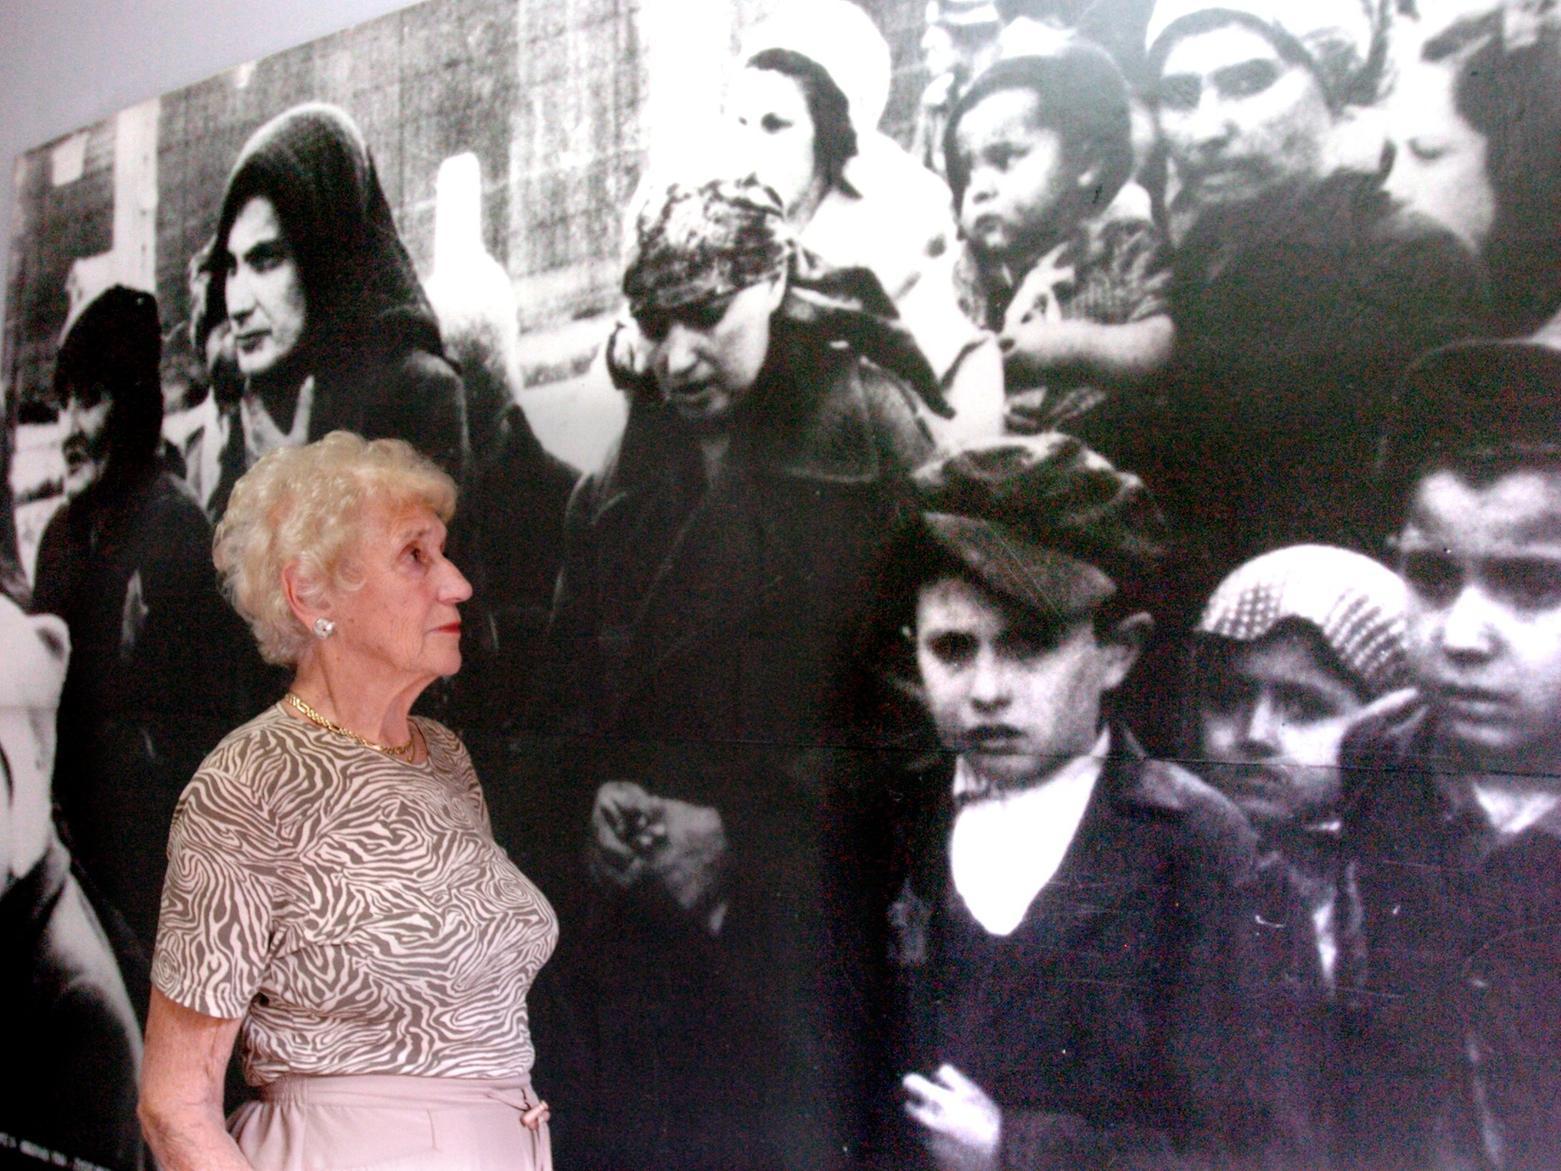 Hilda Mitchell pauses to look at one of the many photographs on the walls.